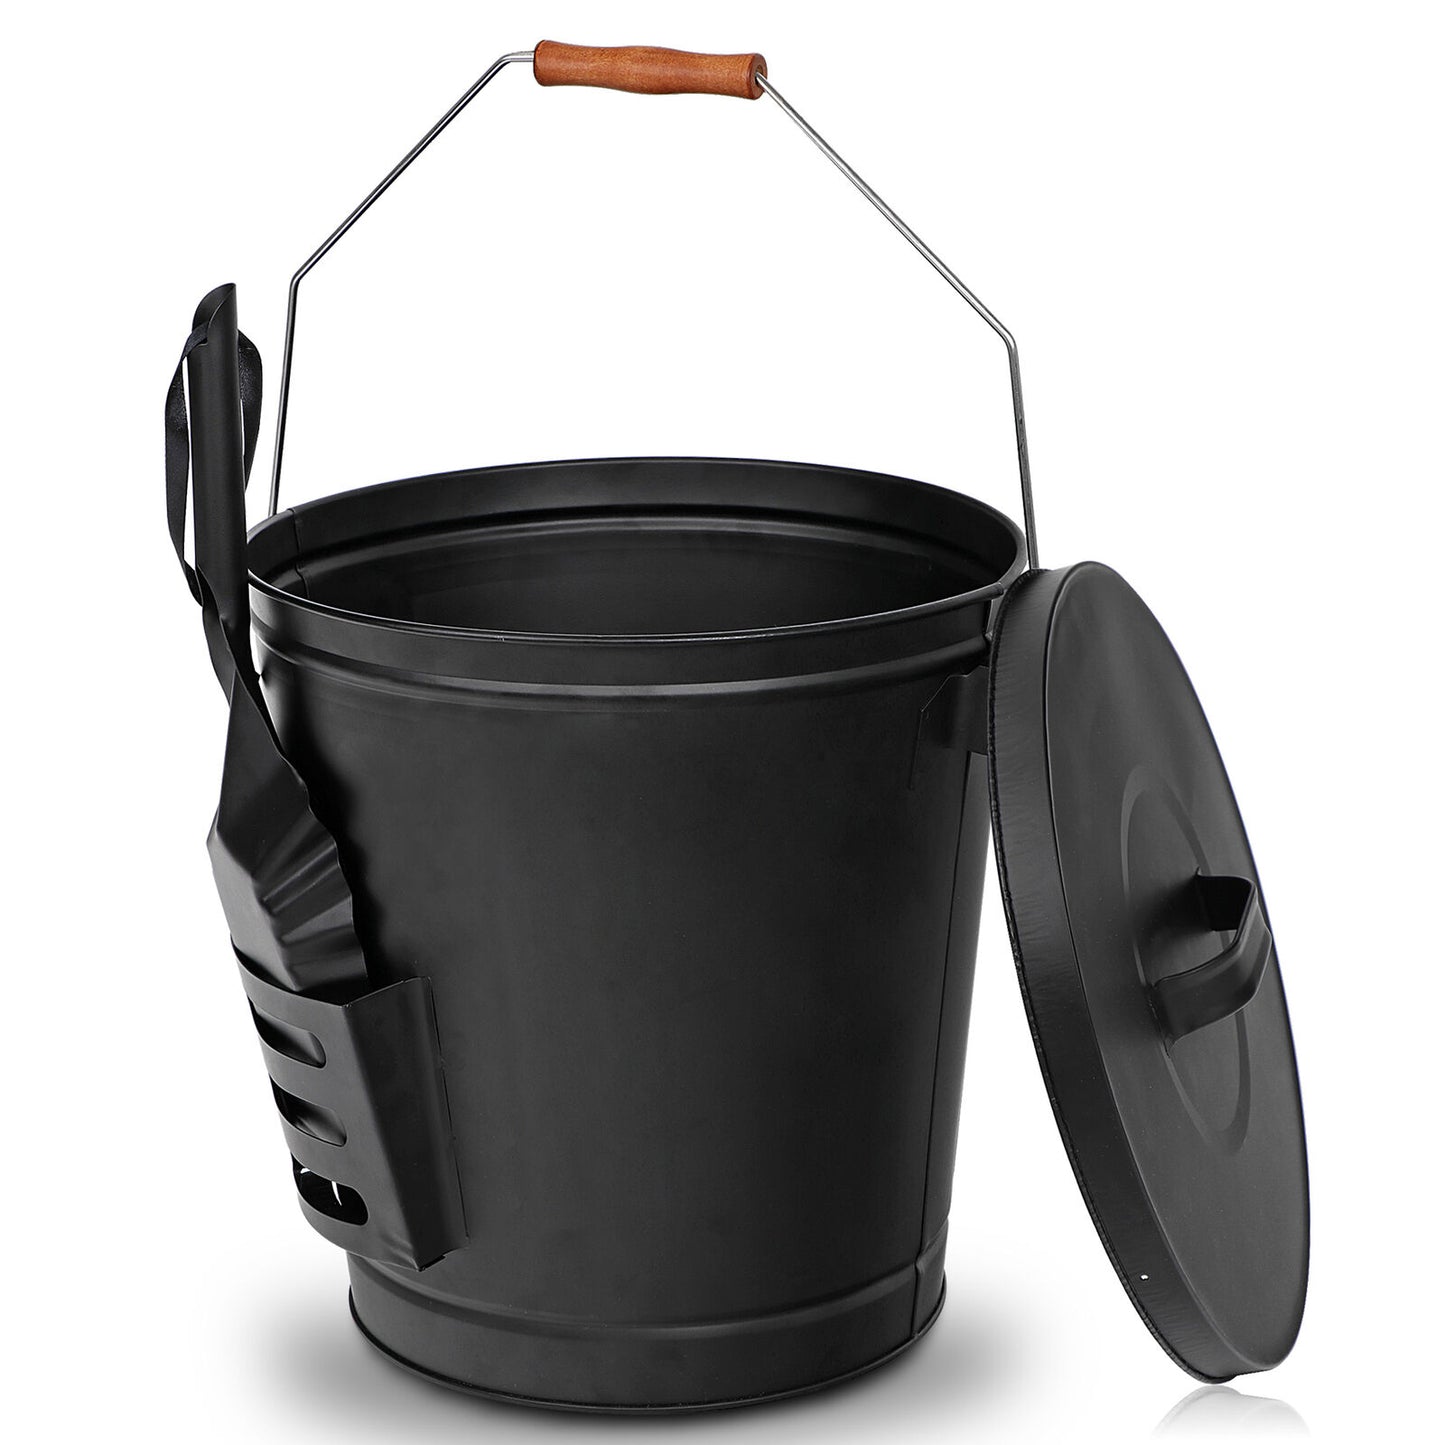 5 Gallon Black Ash Bucket with Lid and Shovel For Fireplaces Fire Pits Stoves